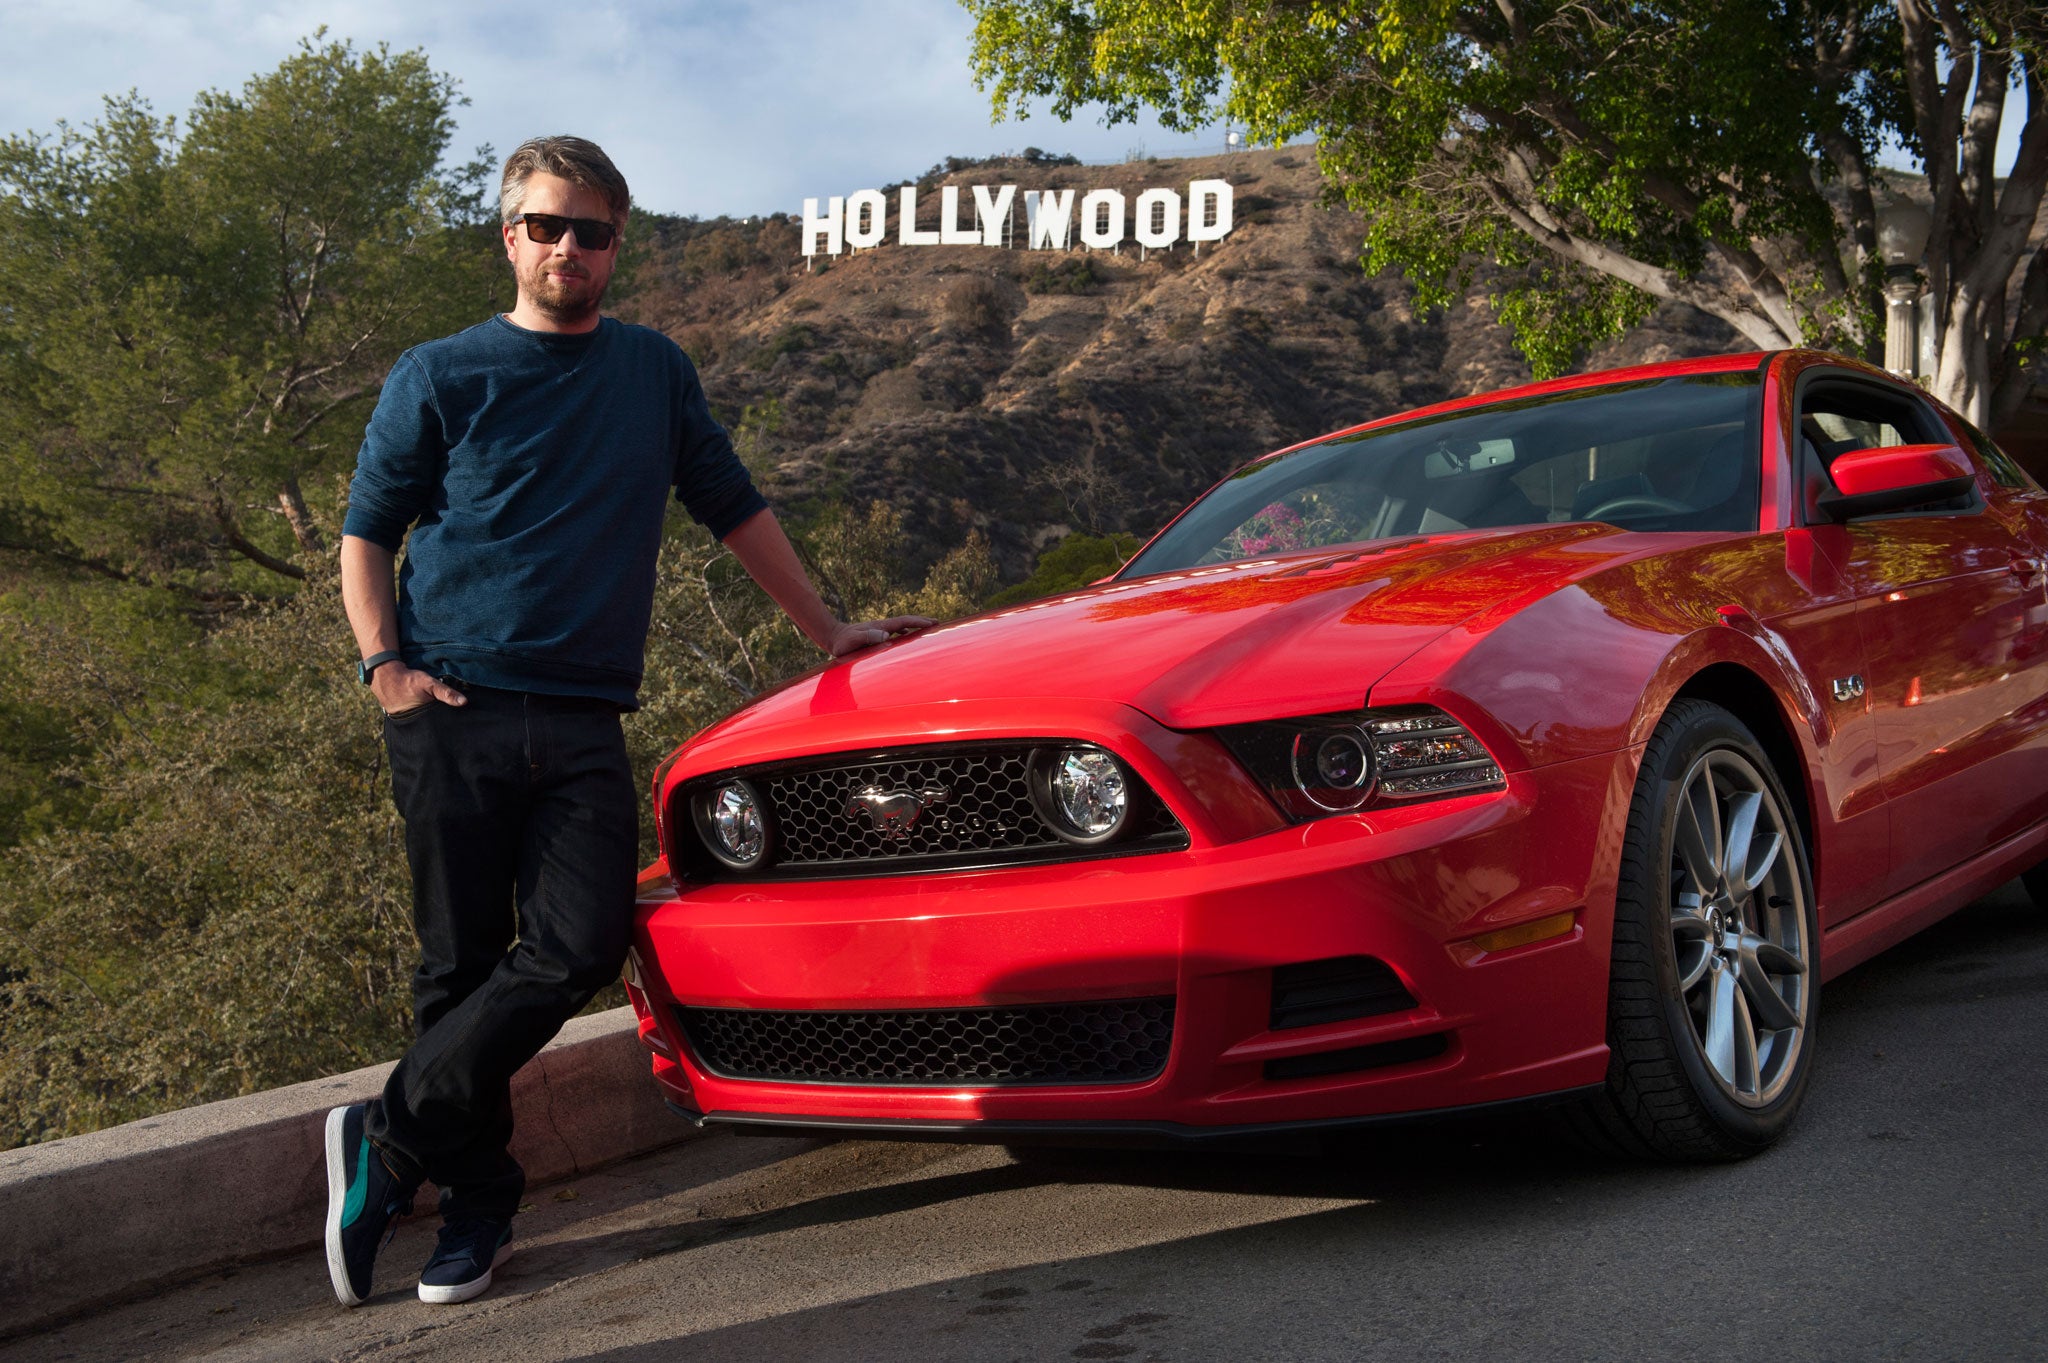 Tim Walker with his Mustang beneath the Hollyood sign and driving through the Los Angeles River